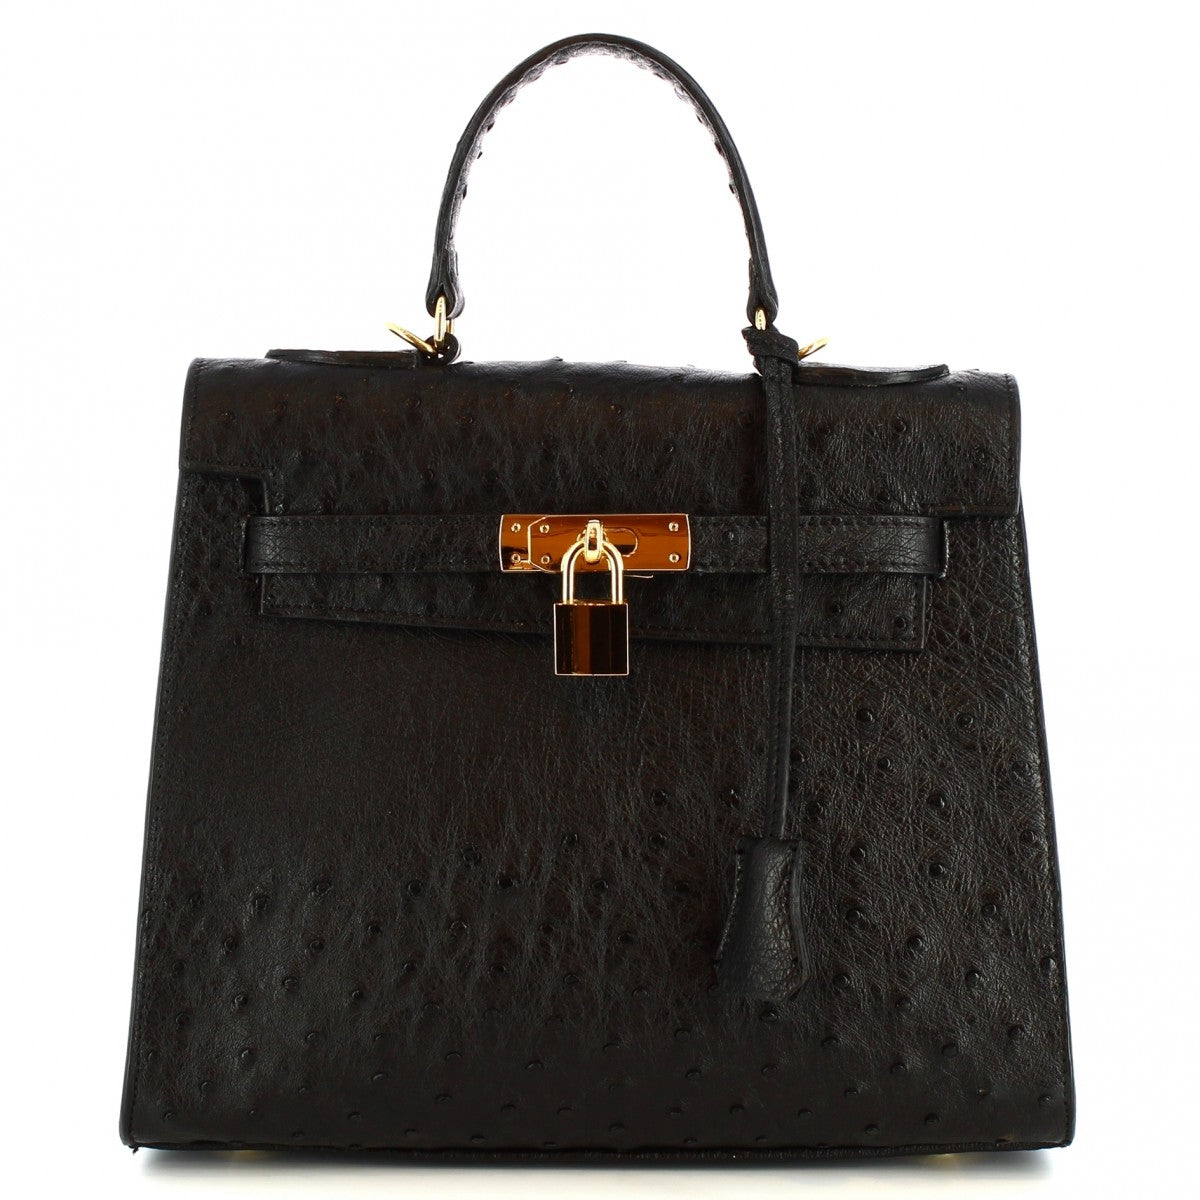 Italian Ostrich leather bags